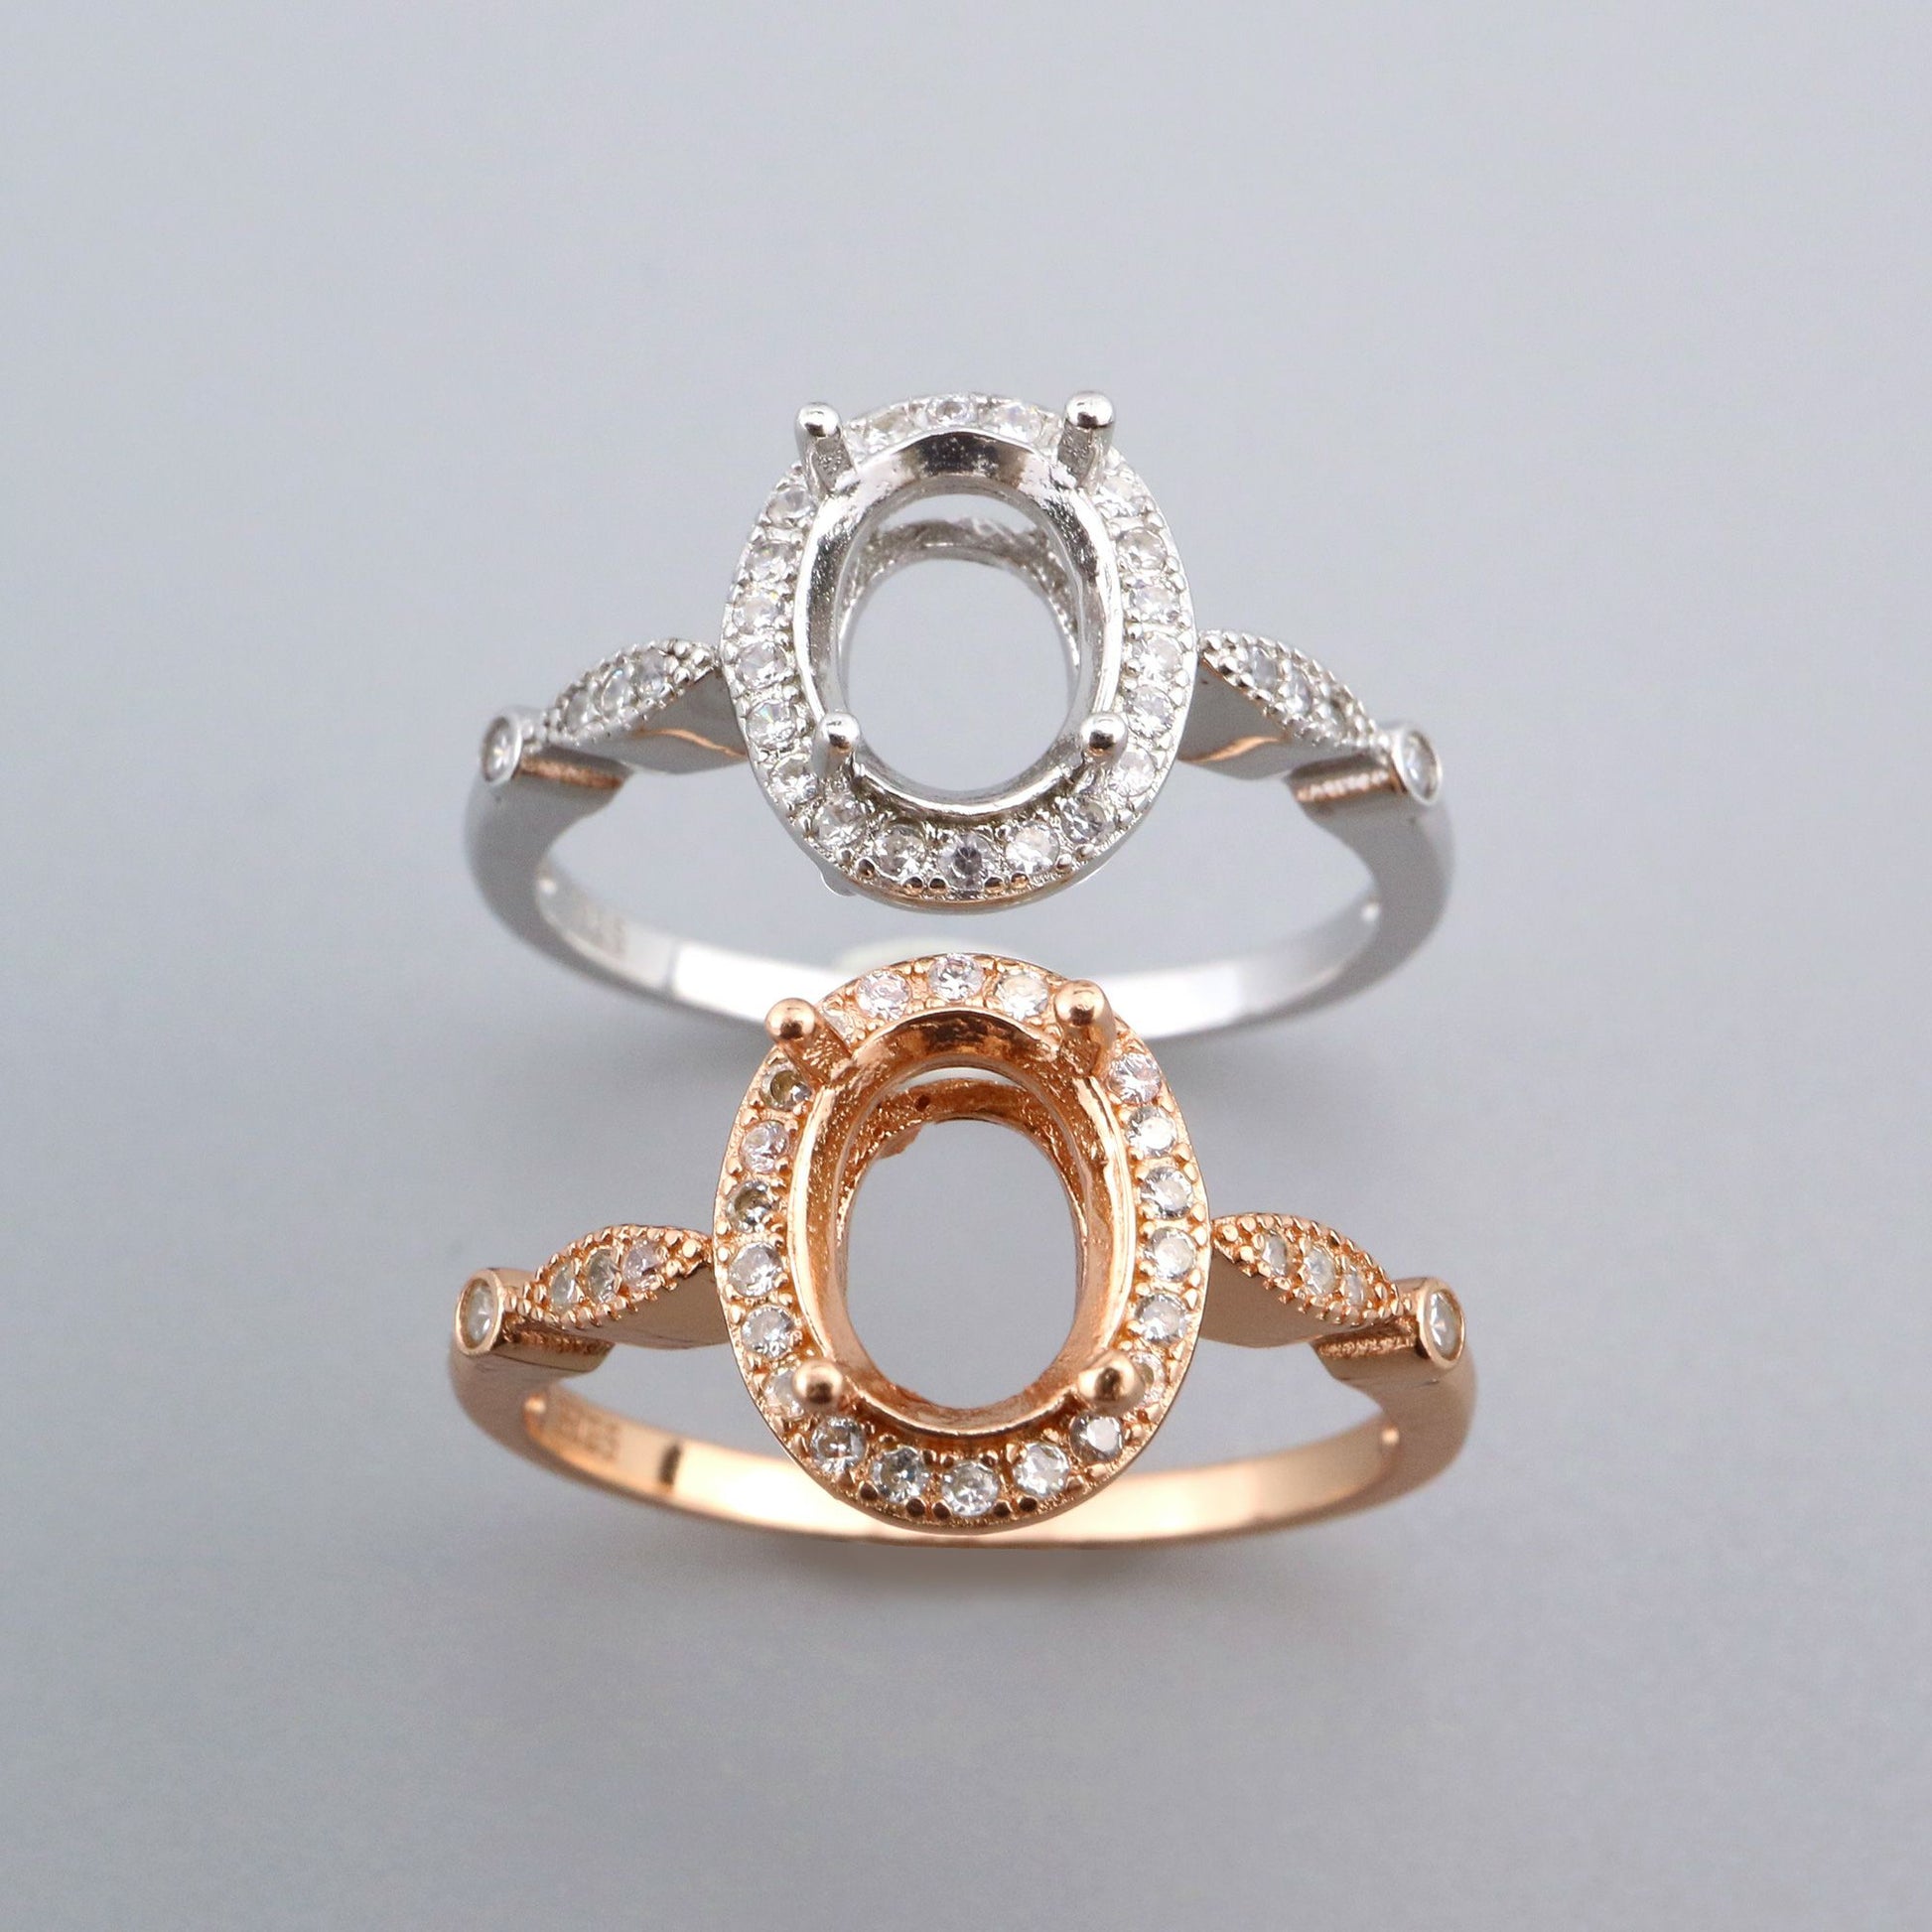 One silver and one rose gold vintage style oval semi mount.